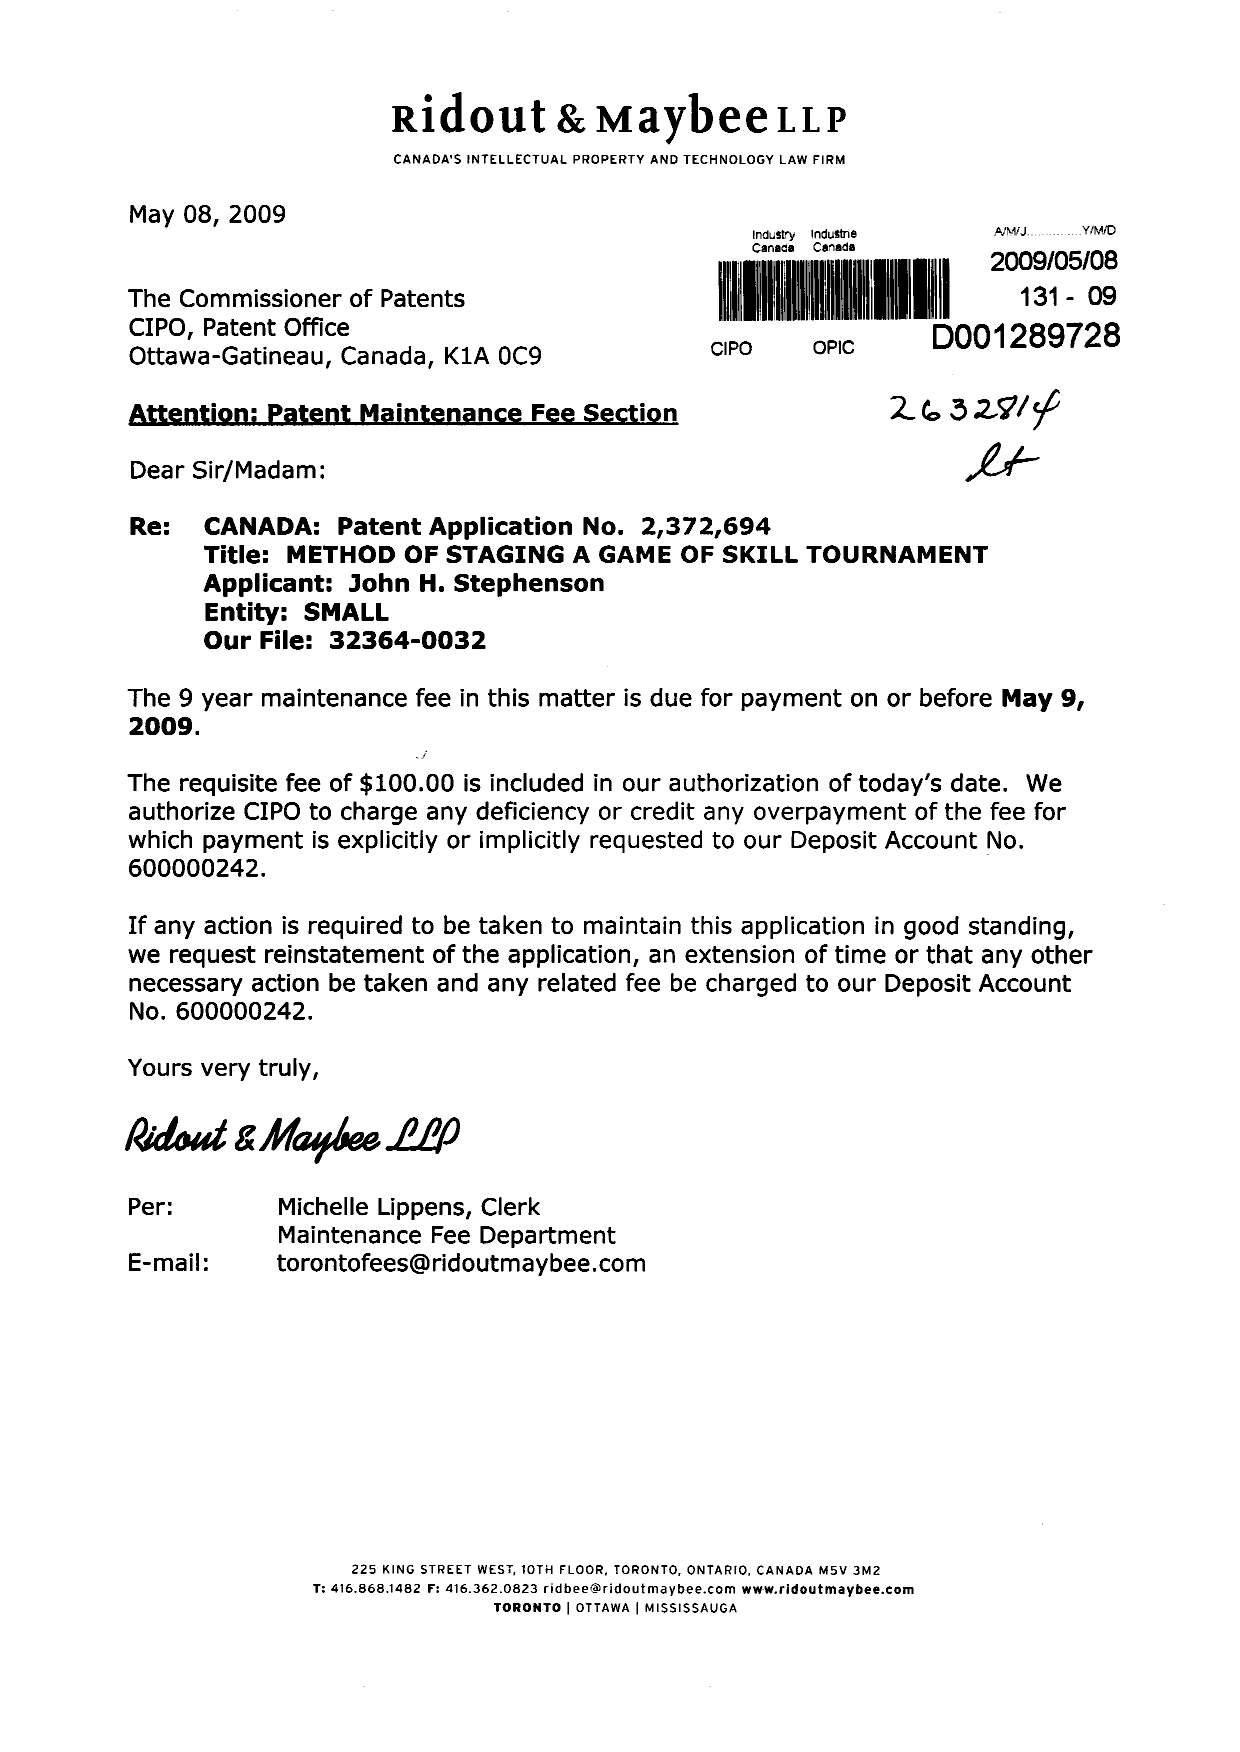 Canadian Patent Document 2372694. Fees 20090508. Image 1 of 1